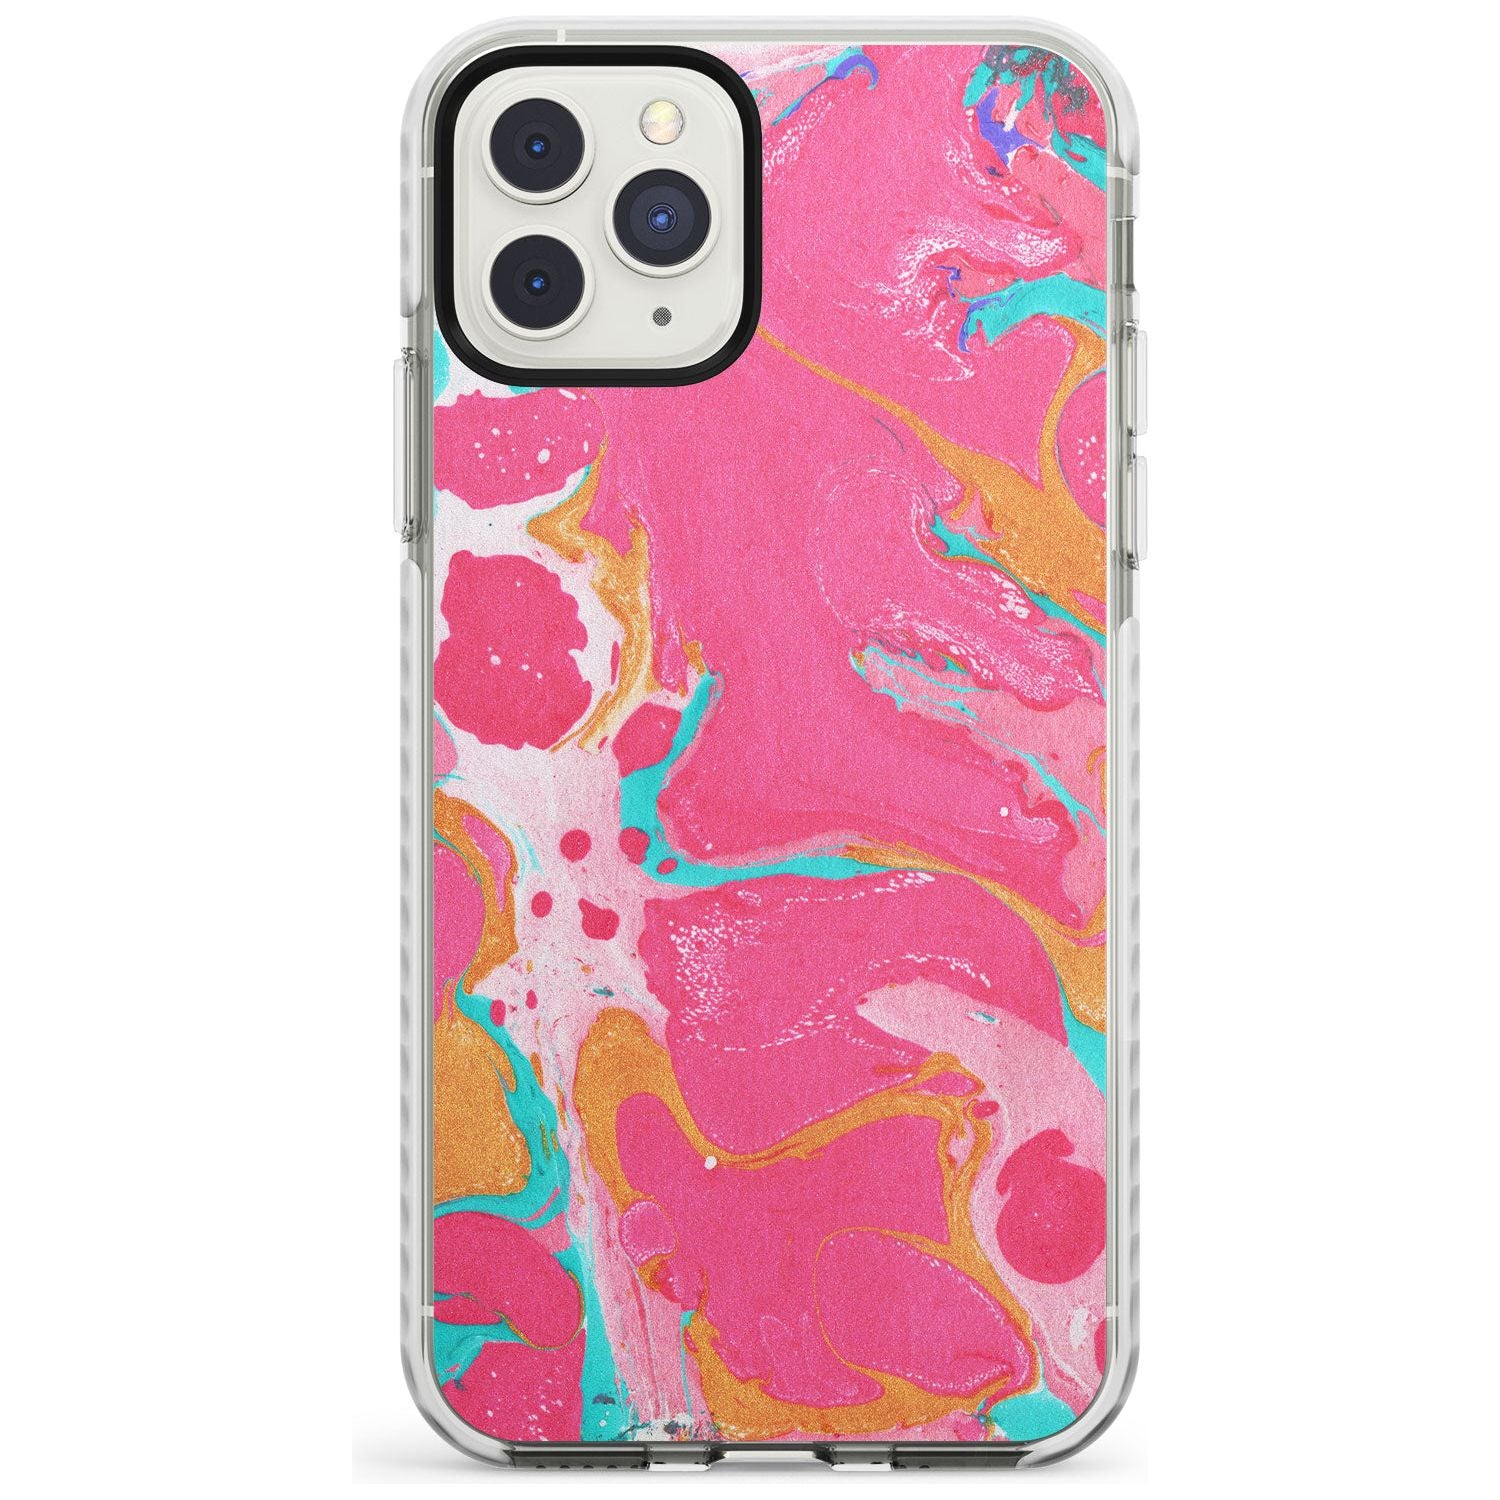 Pink, Orange & Turquoise Marbled Paper Pattern Impact Phone Case for iPhone 11 Pro Max